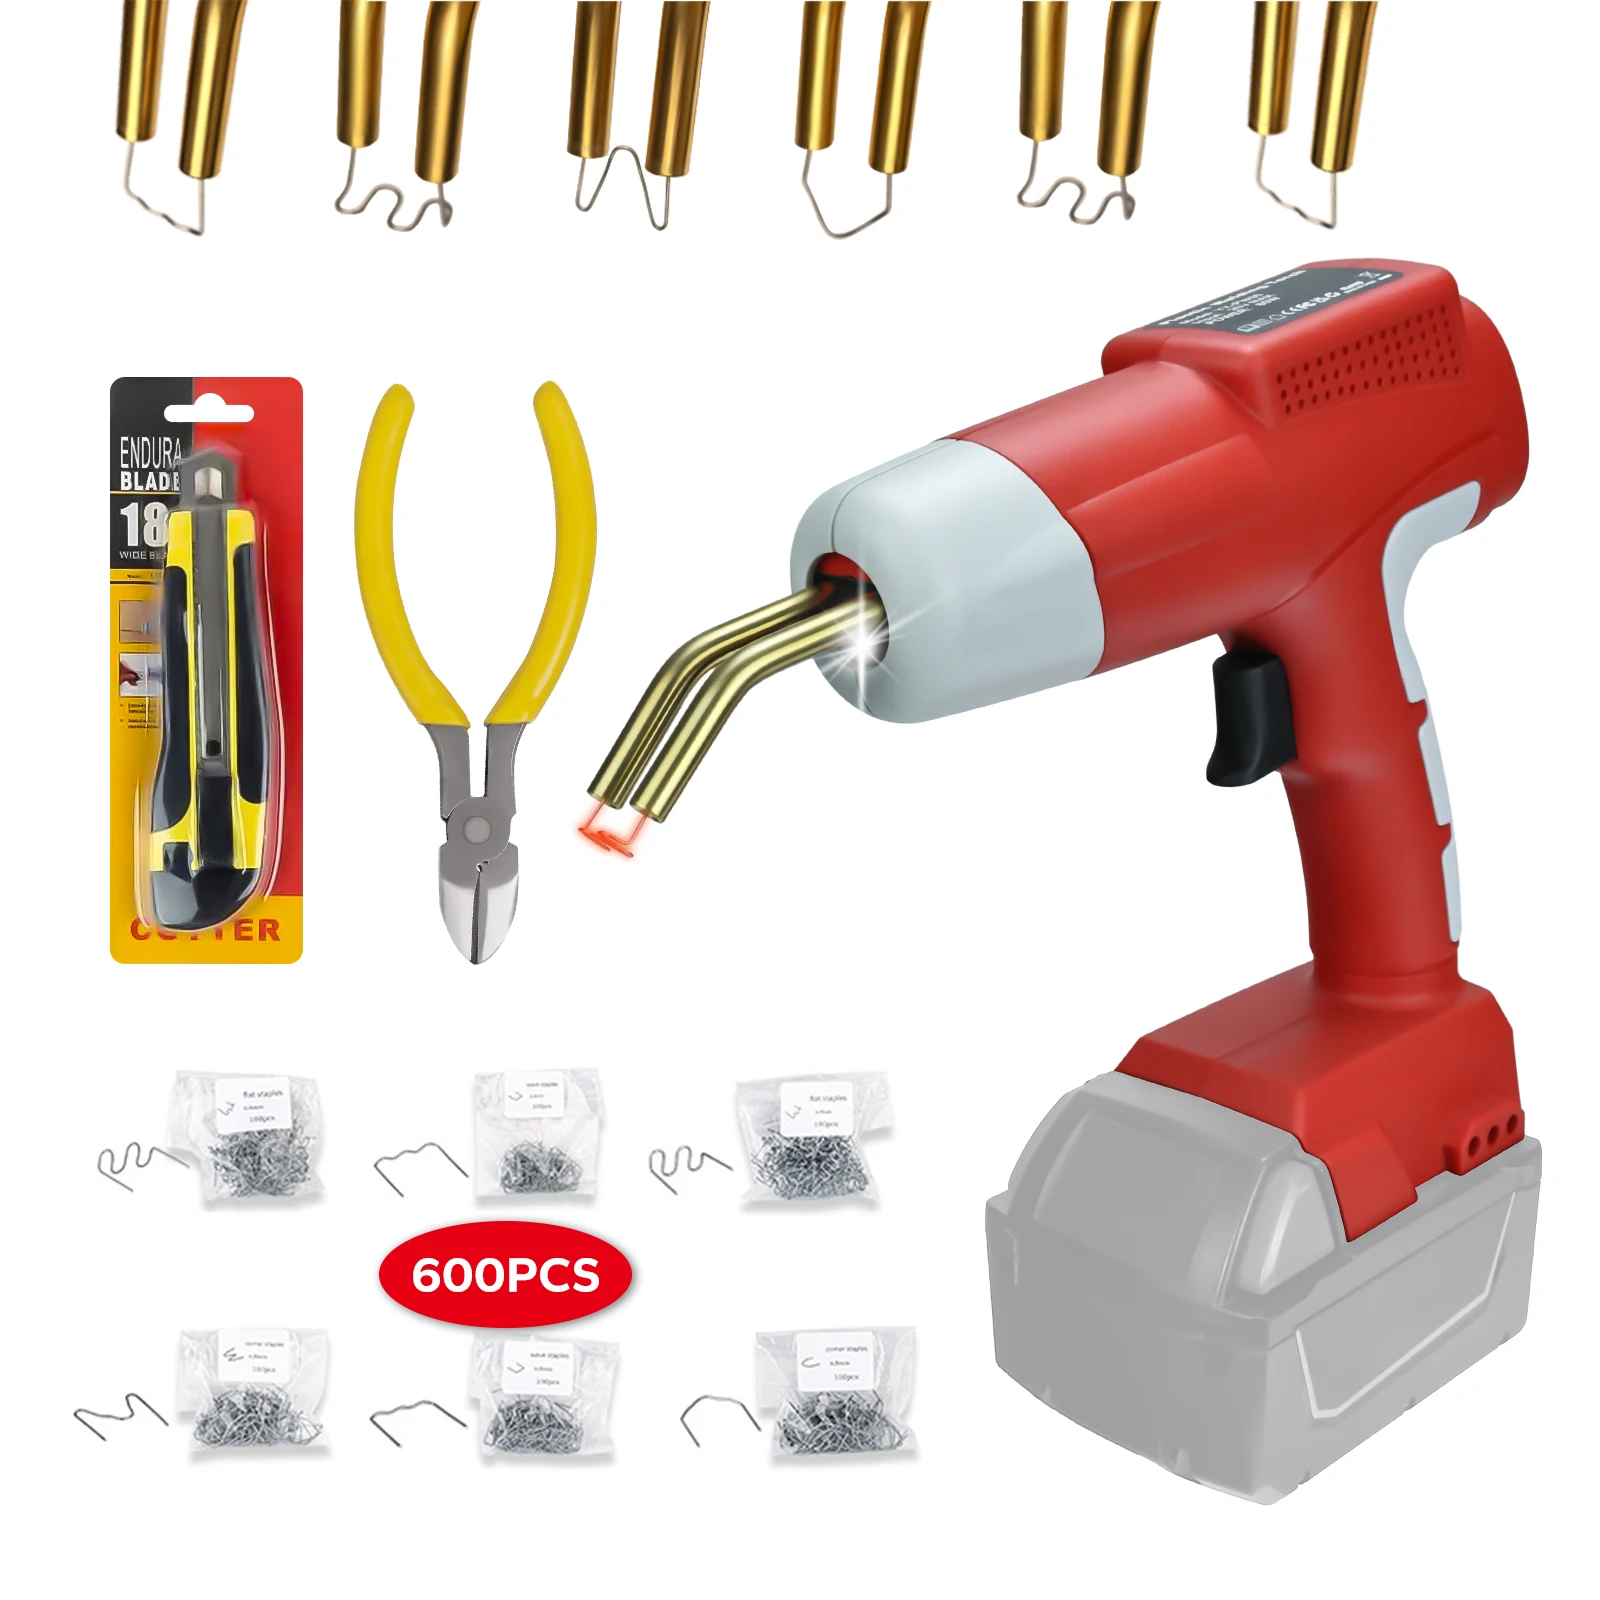 80W Plastic Welding Gun with 600pcs Nails Car Repair Nail Welding Wire Tool Welder Torch Kit for Milwaukee 18-20V Li-ion Battery 80w plastic welder torch kit welding gun with 600pcs nails car repair nail welding wire tool for milwaukee 18 20v li ion battery